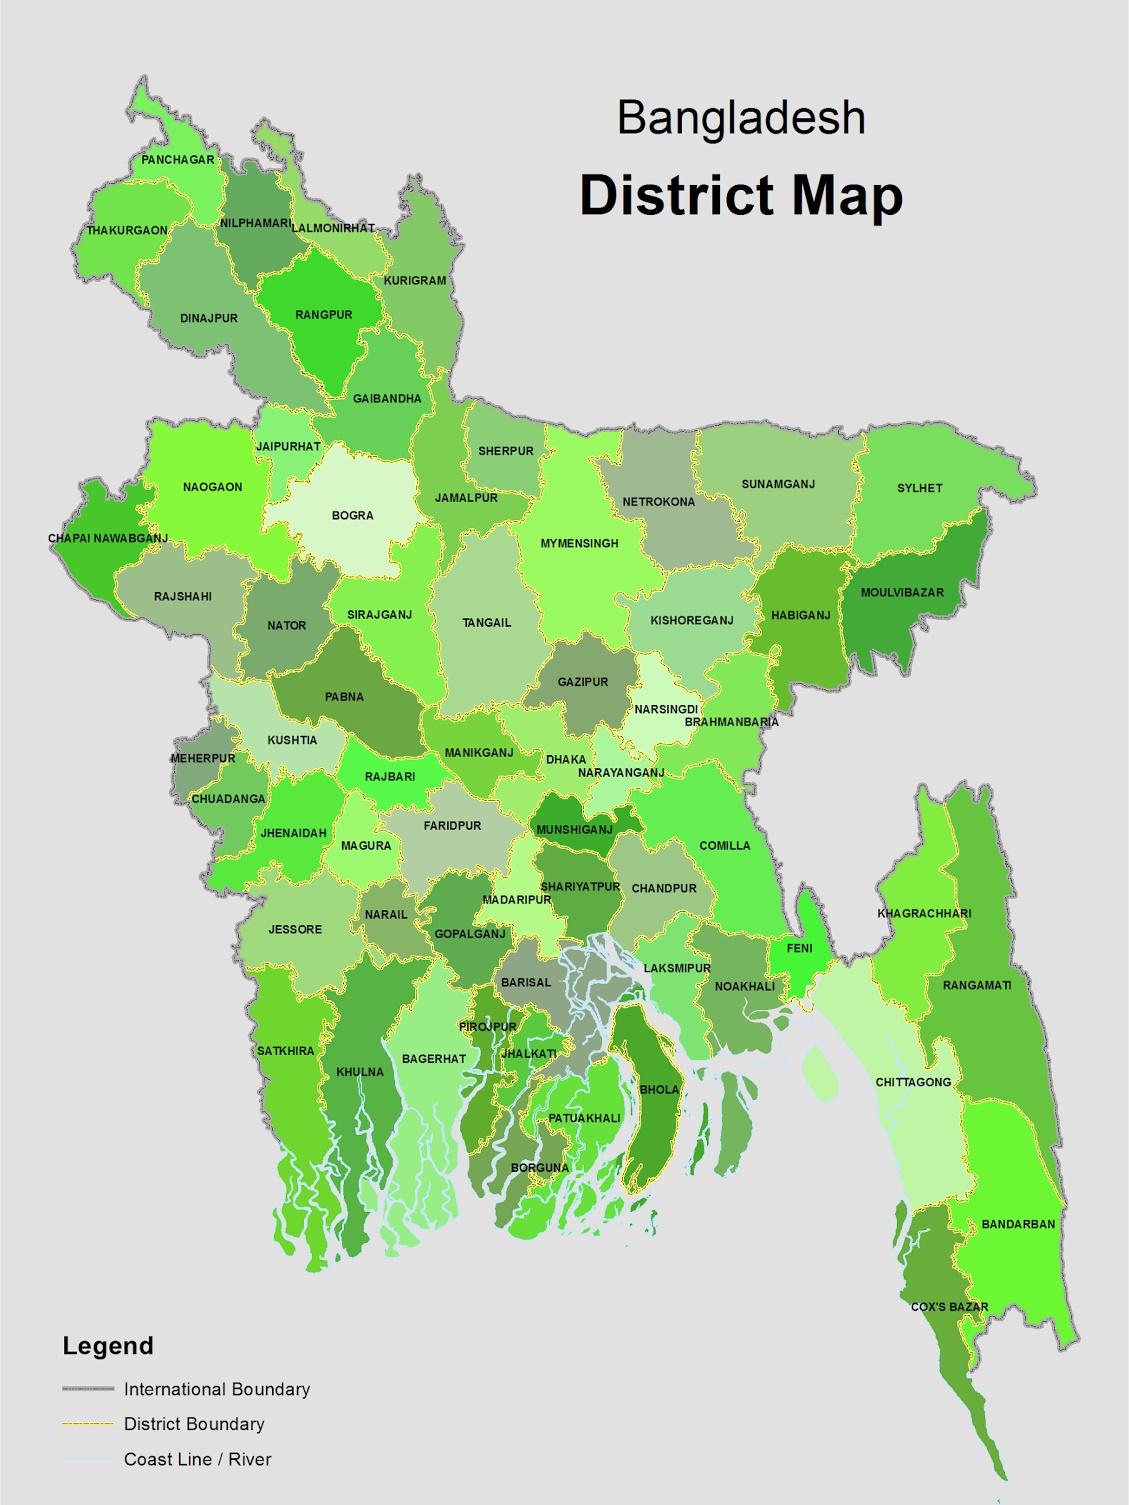 The divisions of Bangladesh are divided into 64 districts or zila. The capital of a district is called a district seat (zila sadar). The districts are further subdivided into 493 sub-districts or upazila.